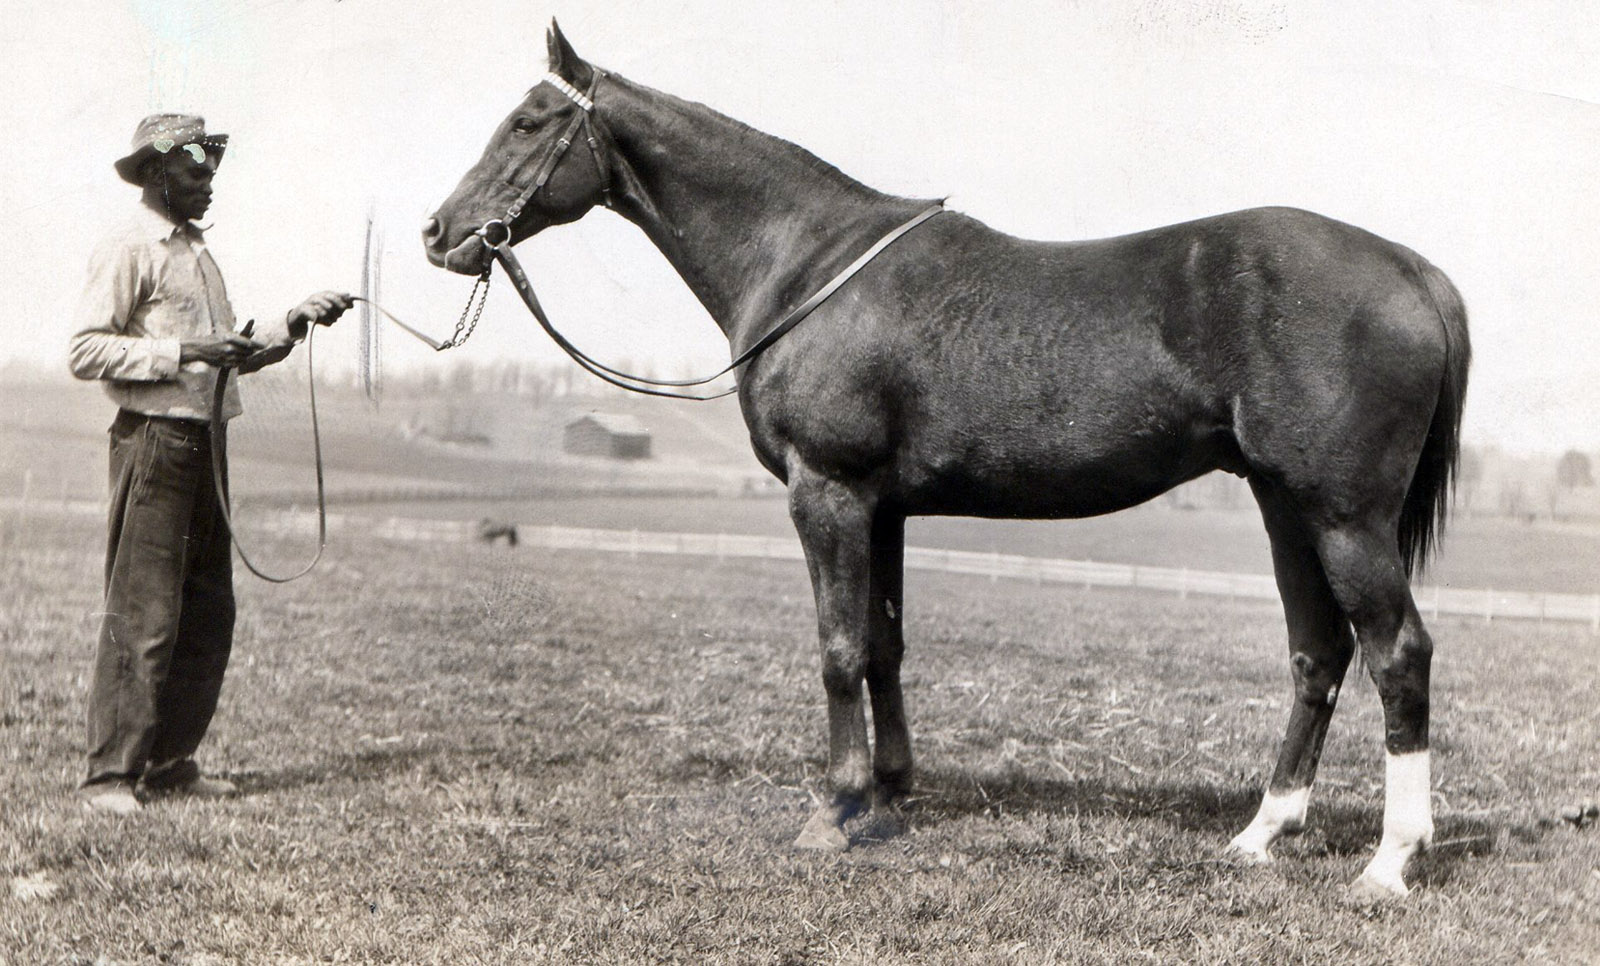 Sarazen in retirement at Brookdale Farm in 1930 (L. S. Sutcliffe/Museum Collection)